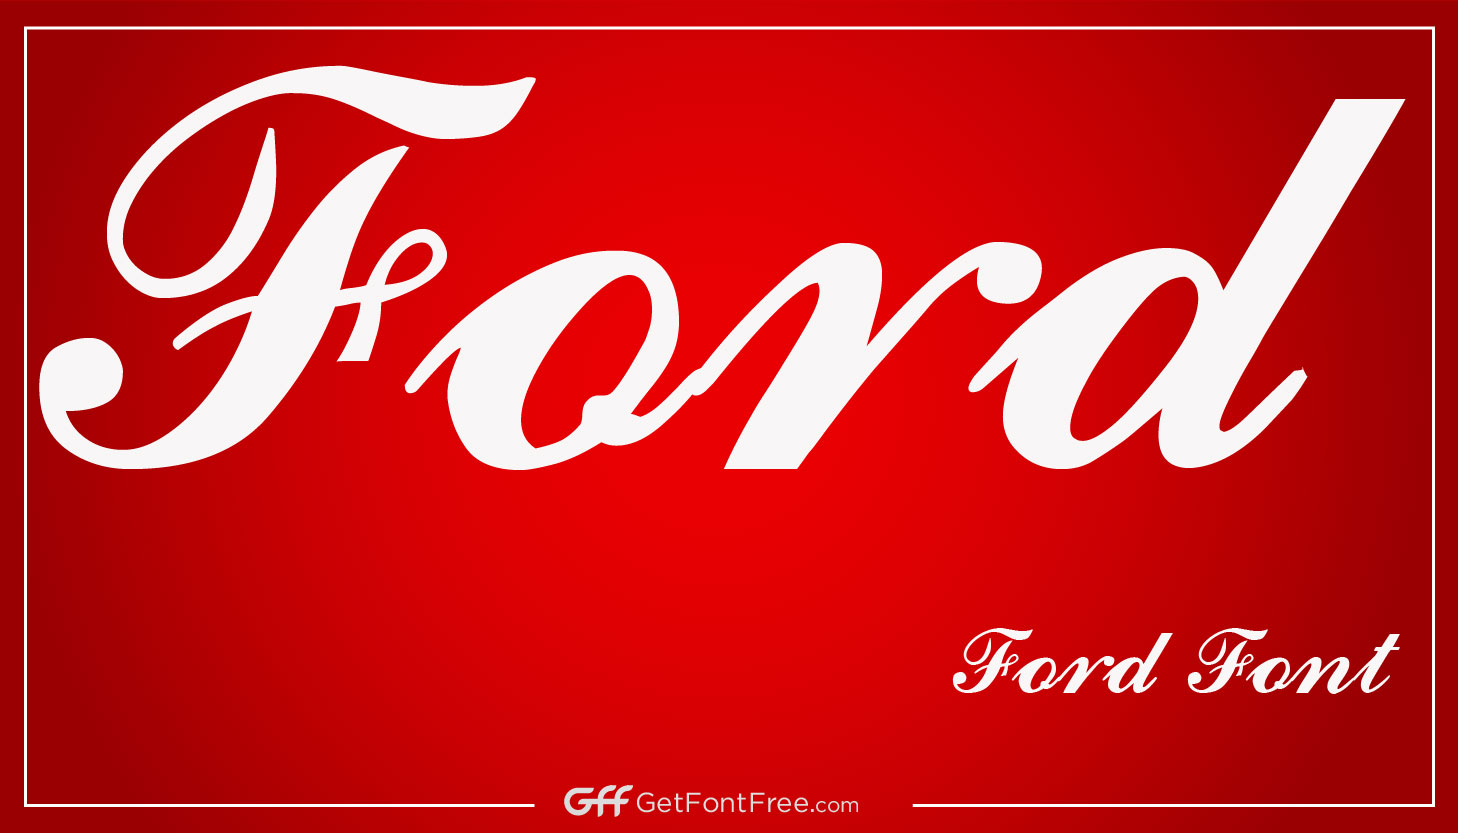 The Ford Font is a custom typeface developed by Ford Motor Company for use in their branding and communications. It was designed to be simple, modern, and versatile, and is used in everything from advertising and marketing materials to product packaging and corporate communications. The Ford font includes a variety of different weights and styles, such as regular, bold, and italic, to give designers flexibility in how they use it. It is also designed to be legible in small sizes and to work well in a variety of different mediums, from print to digital.